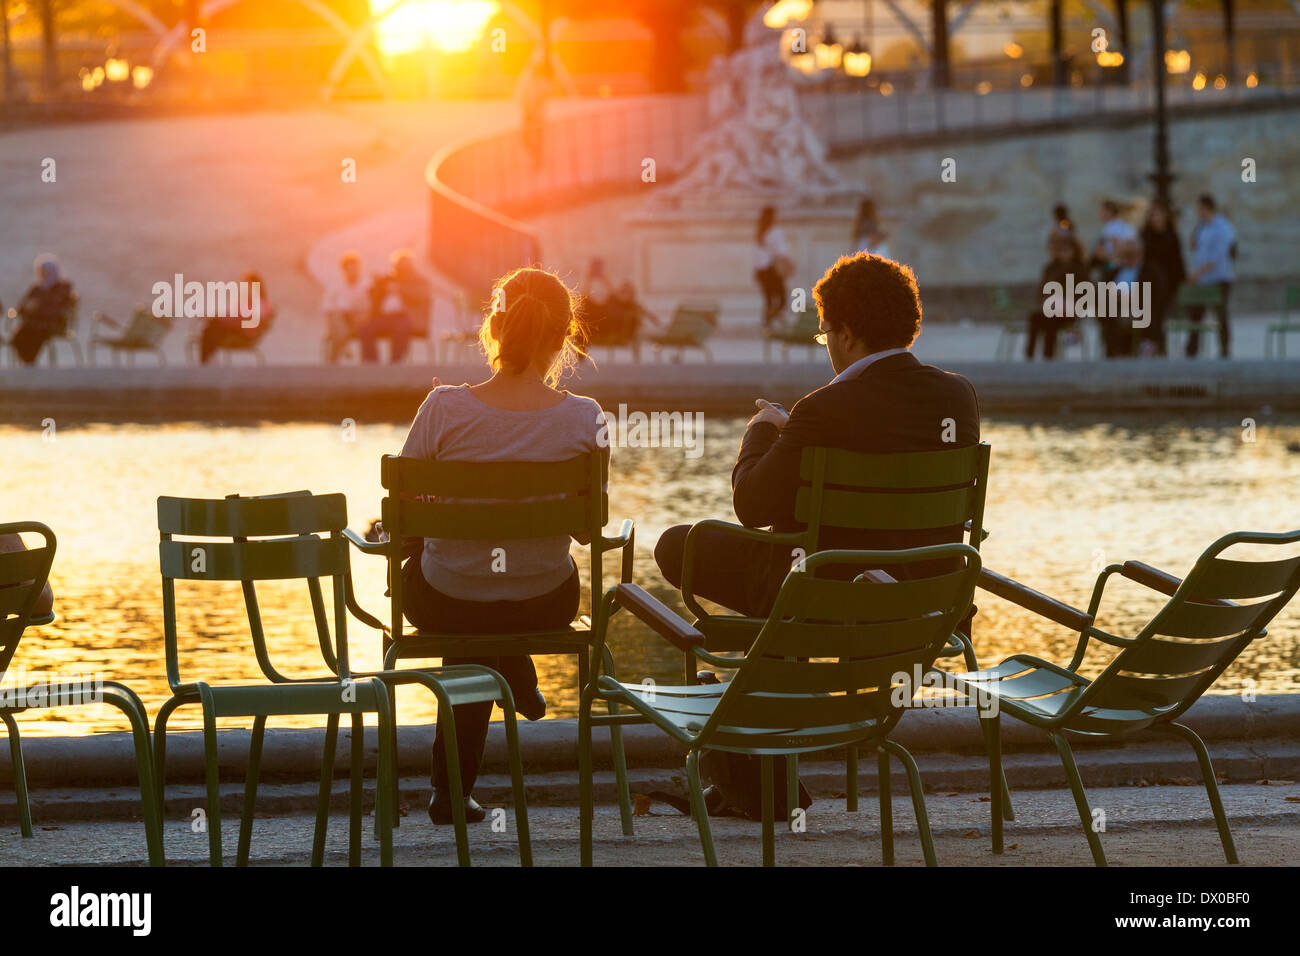 People relaxing in jardin des tuileries at sunset Stock Photo